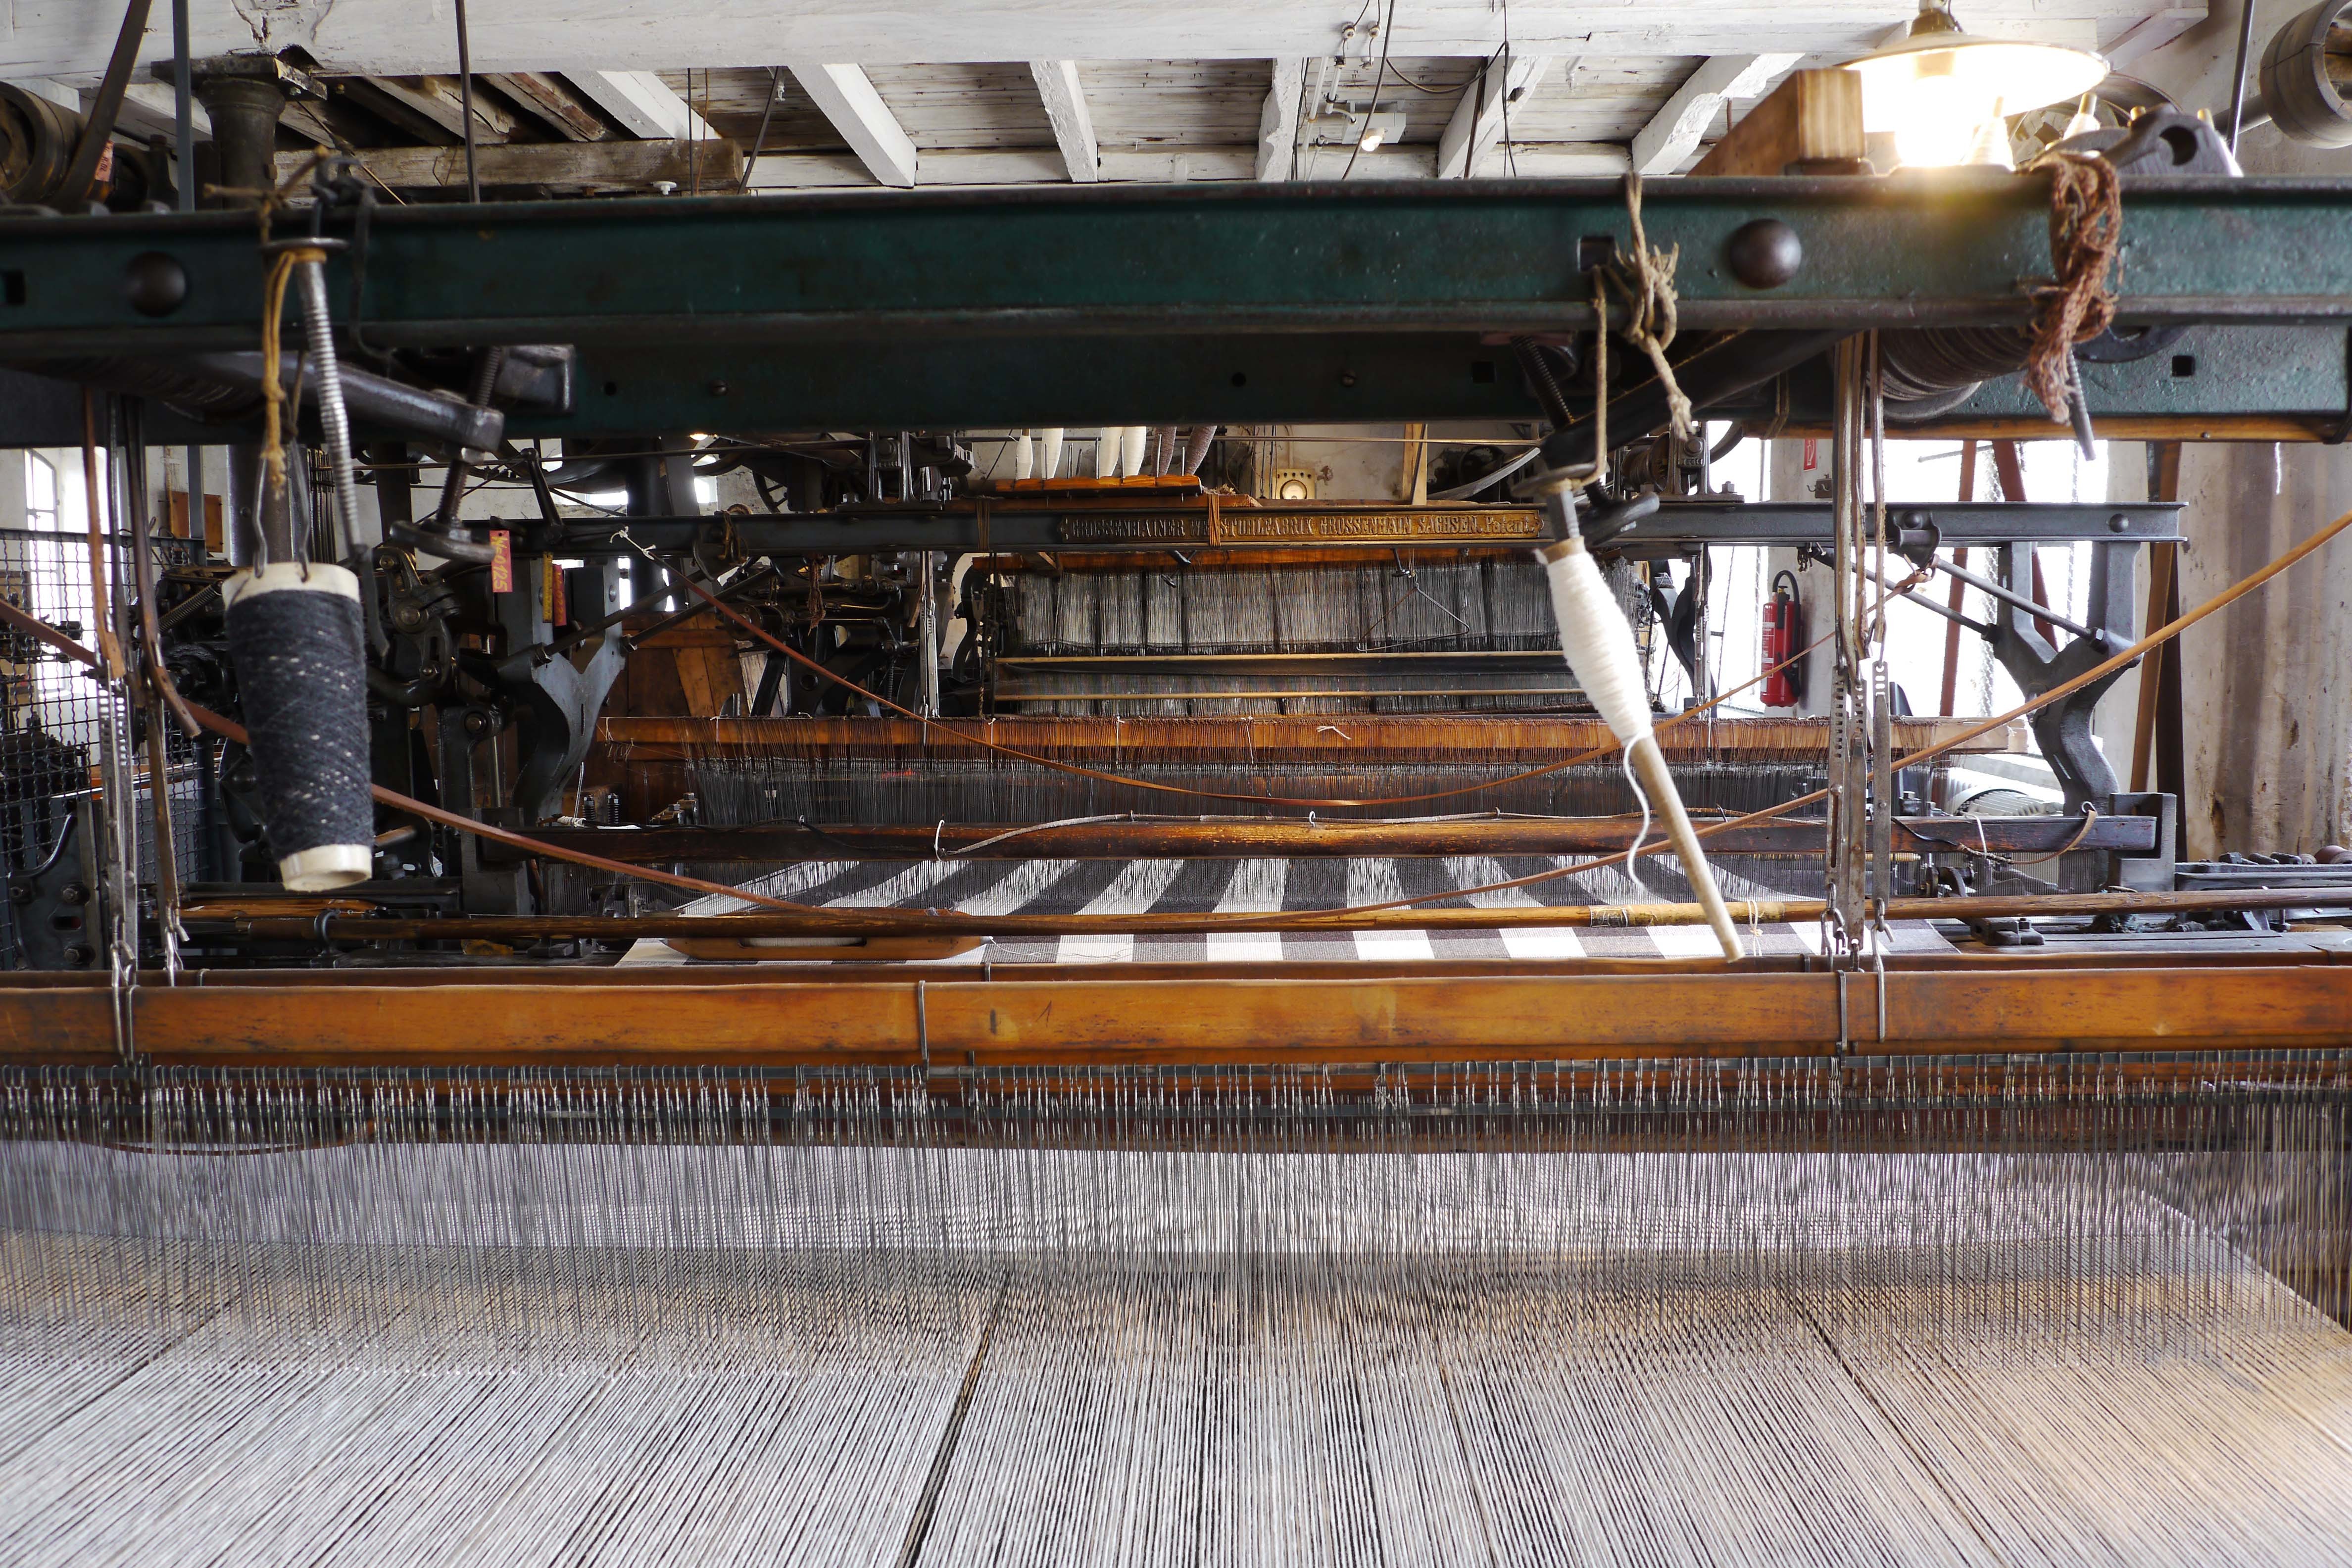 Four looms are still in operation in the weaving hall. The fabrics made on the looms are turned into blankets, scarves, bags, jackets and many more items which can be purchased from the museum shop. (Photo: Helmut Dahmen)